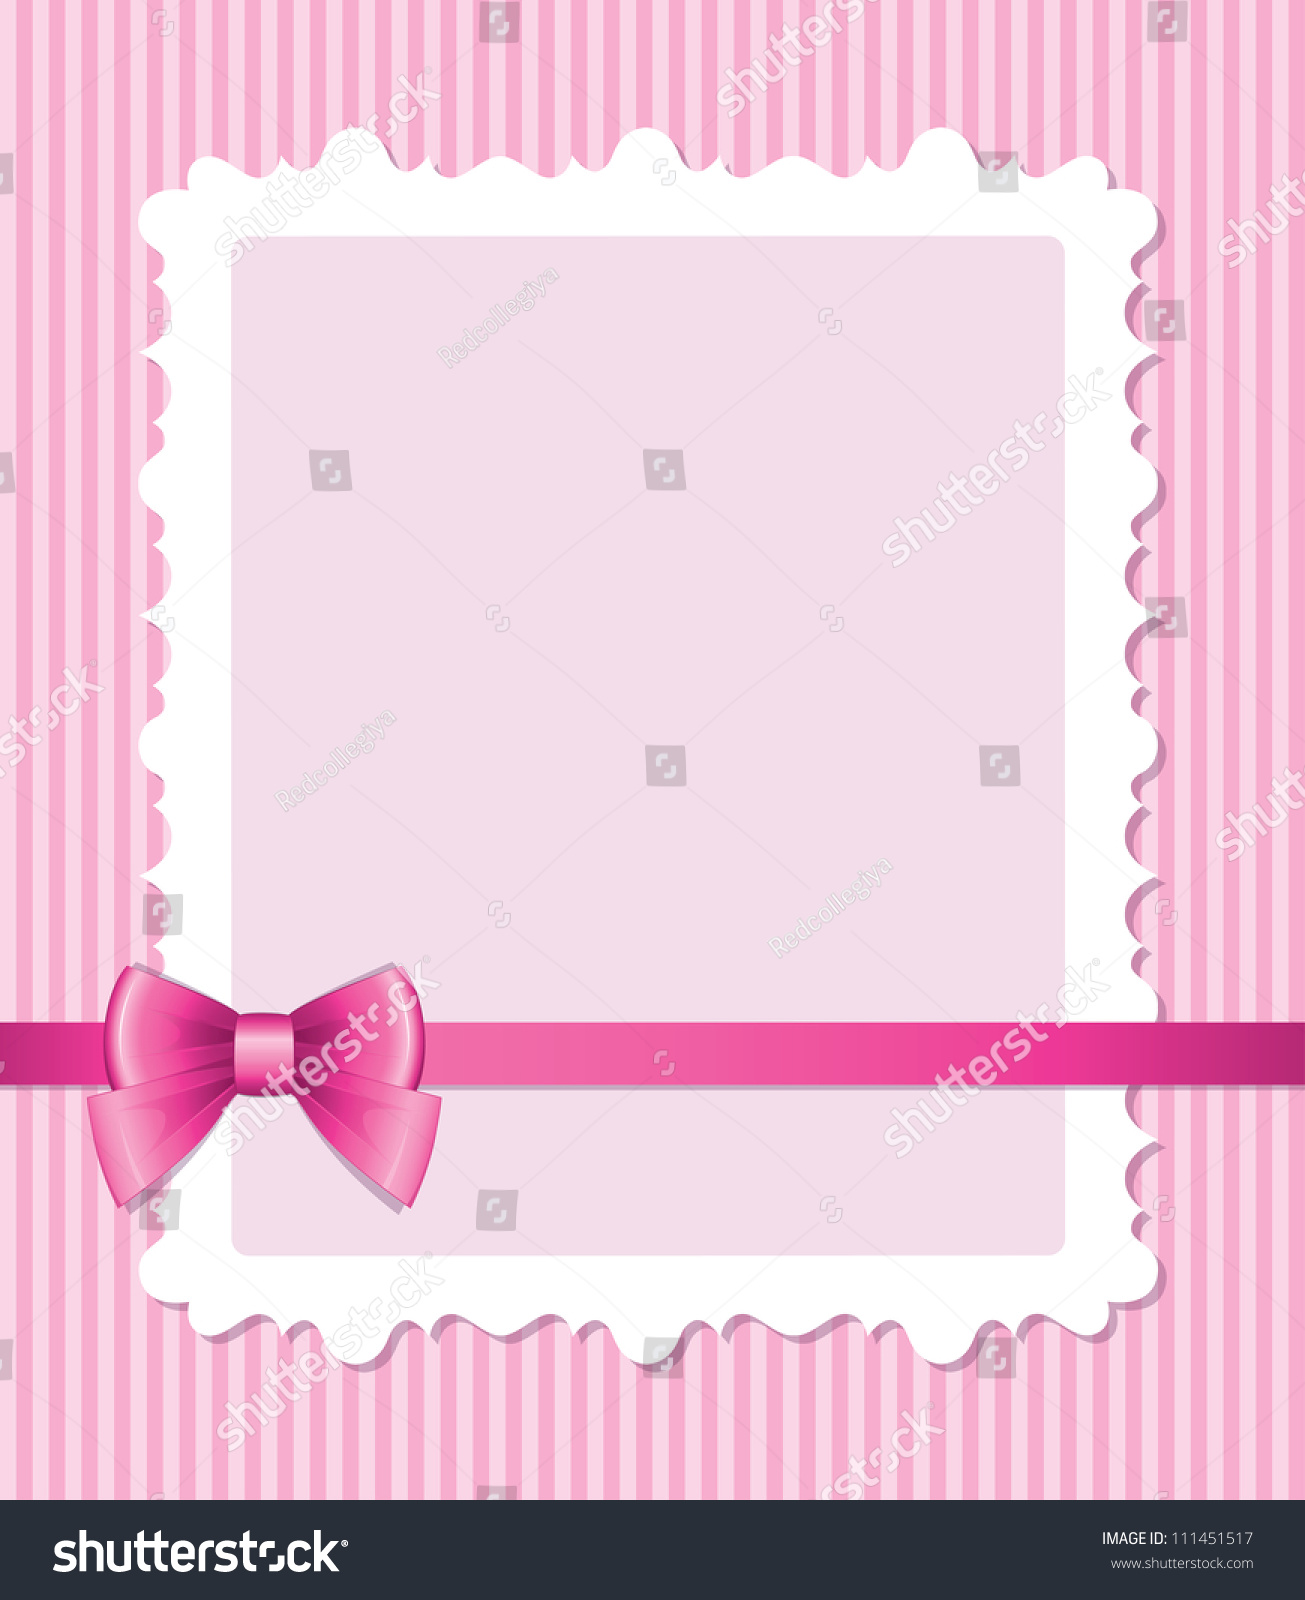 Frame With Glossy Bow On Pink Striped Background Stock Vector ...